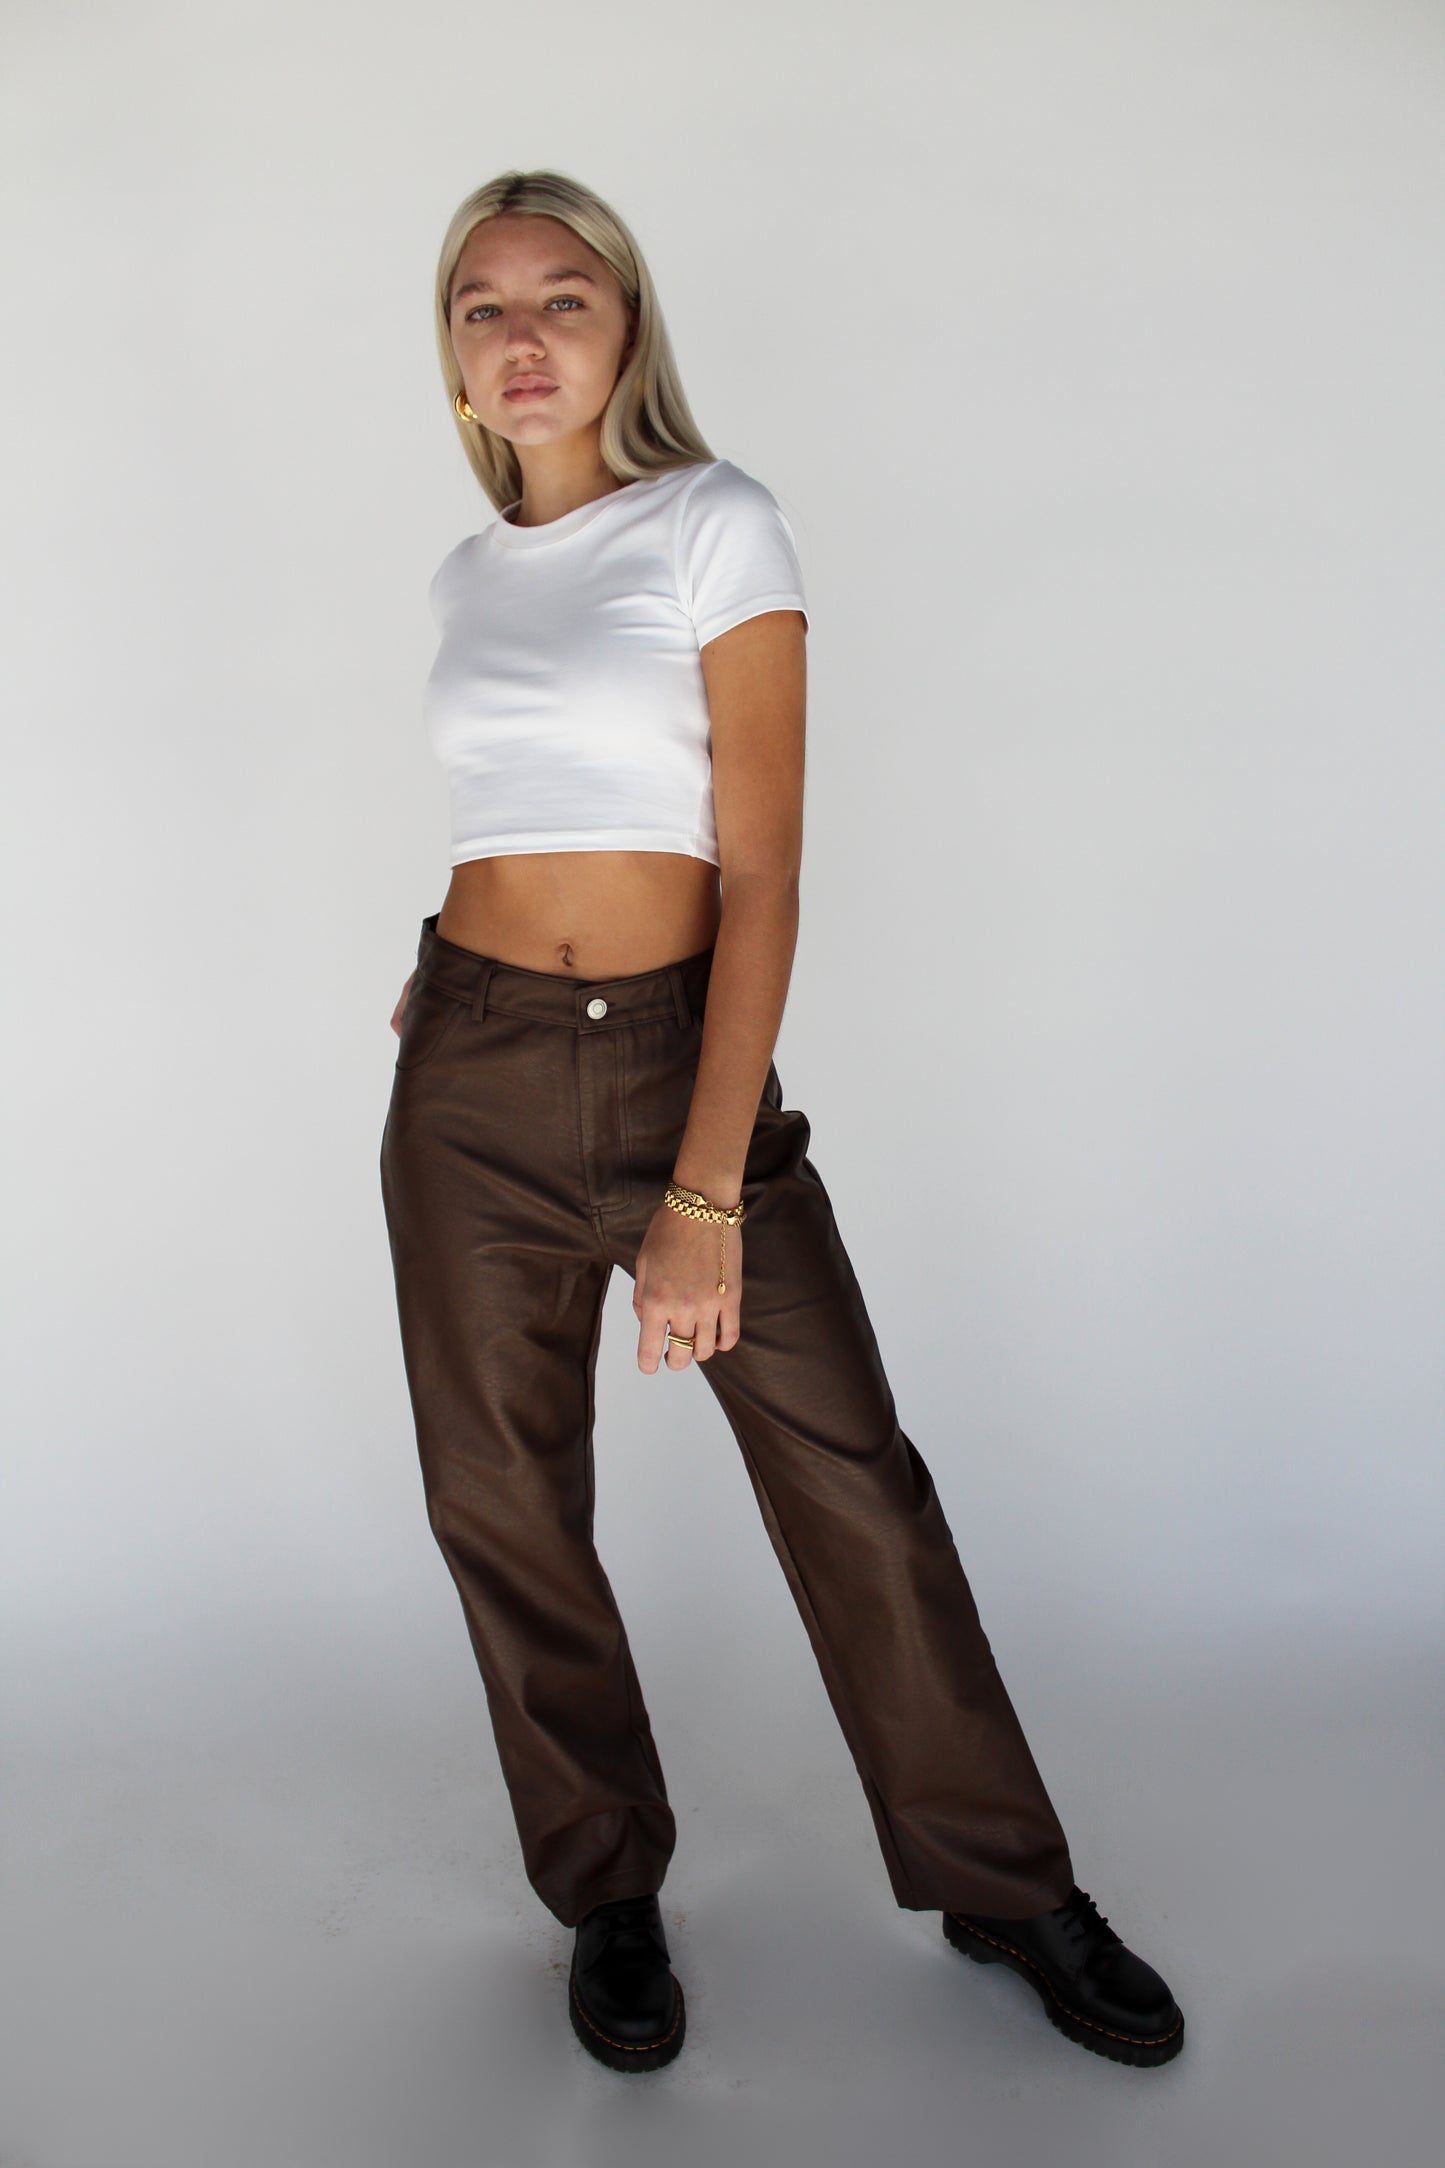 chocolate faux leather pants